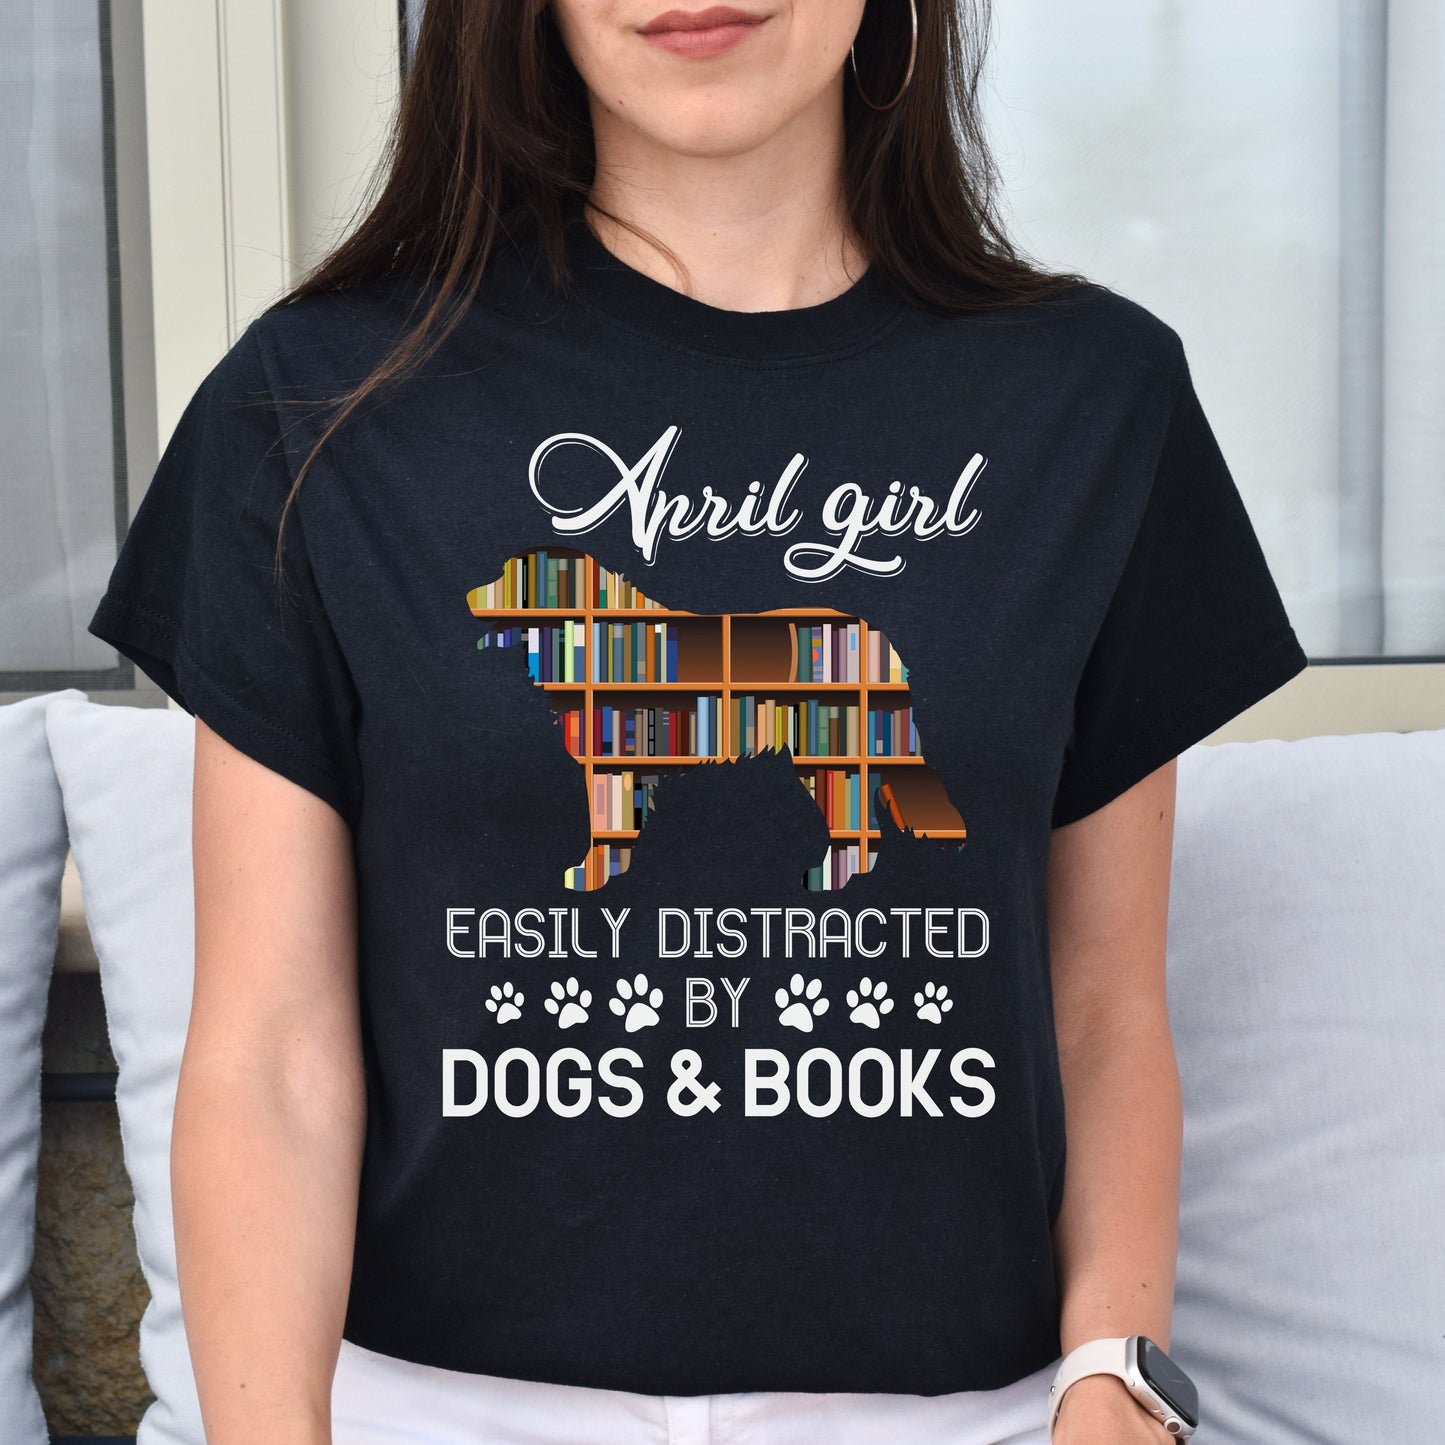 April girl - Easily distracted by dogs and books Unisex T-Shirt gift black dark heather-Black-Family-Gift-Planet